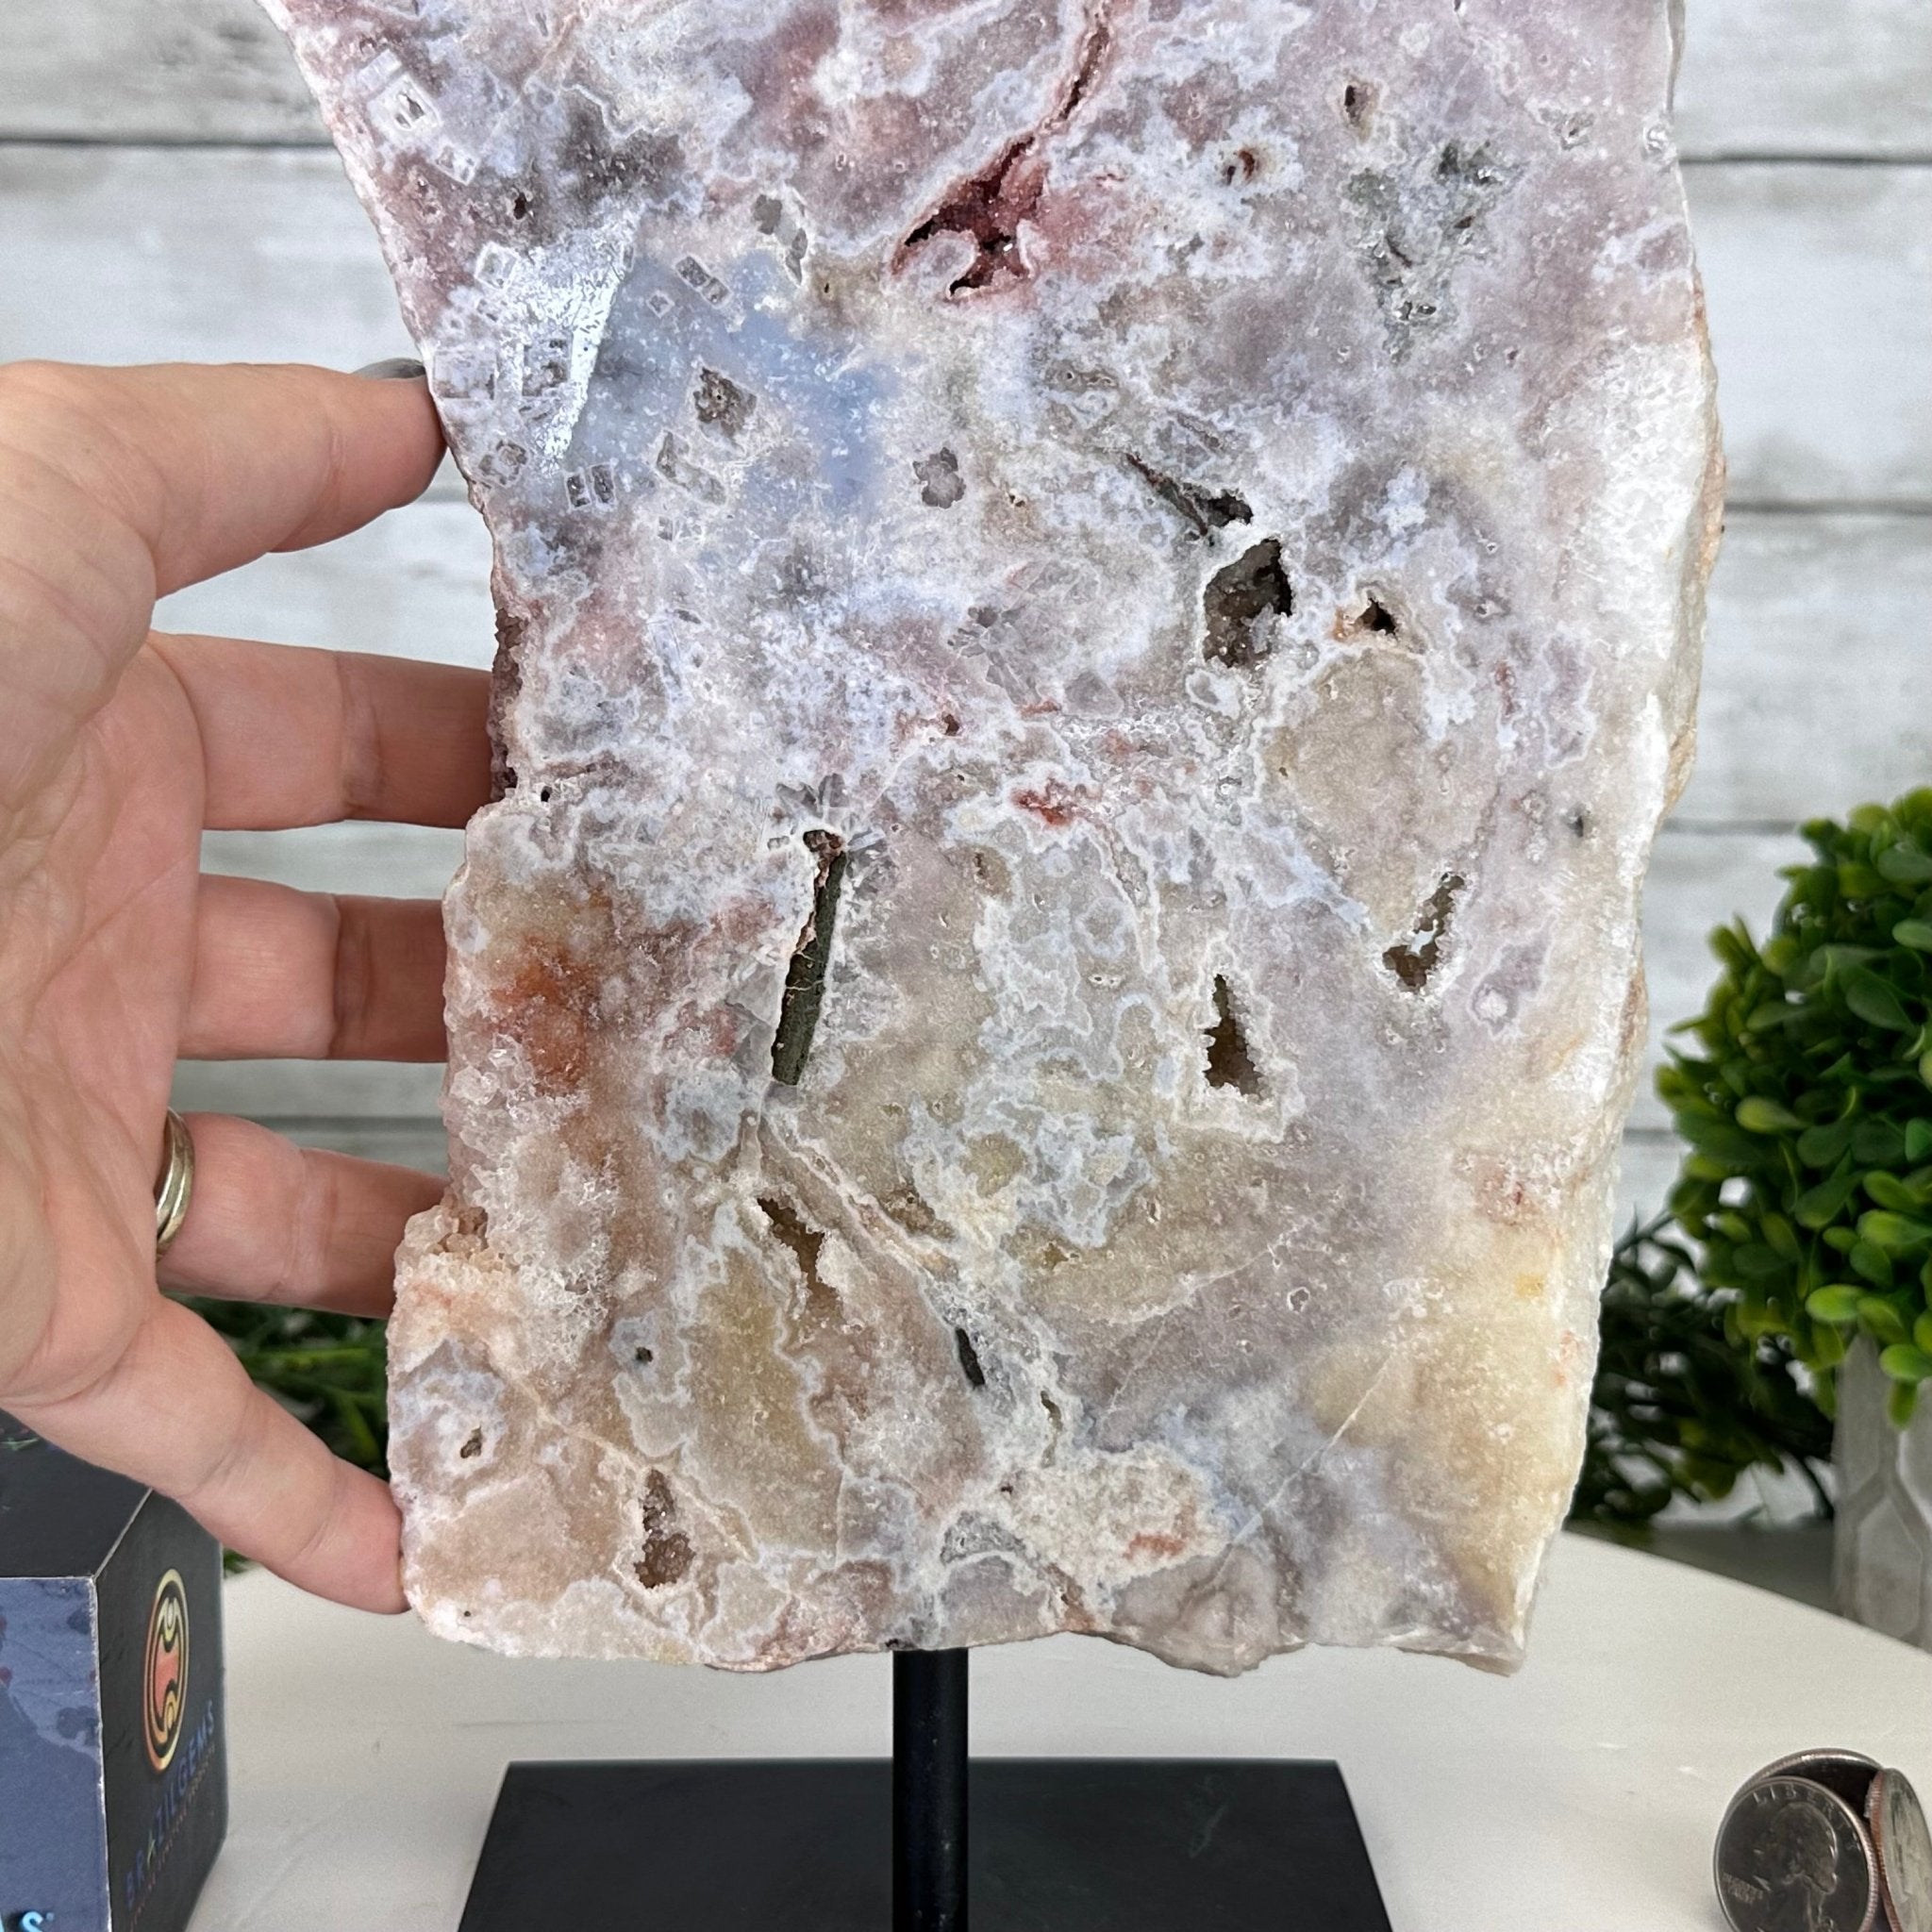 Polished Pink Amethyst Slice on a Stand, 7.8 lbs, 16.5" Tall #5743-0023 - Brazil GemsBrazil GemsPolished Pink Amethyst Slice on a Stand, 7.8 lbs, 16.5" Tall #5743-0023Slices on Fixed Bases5743-0023